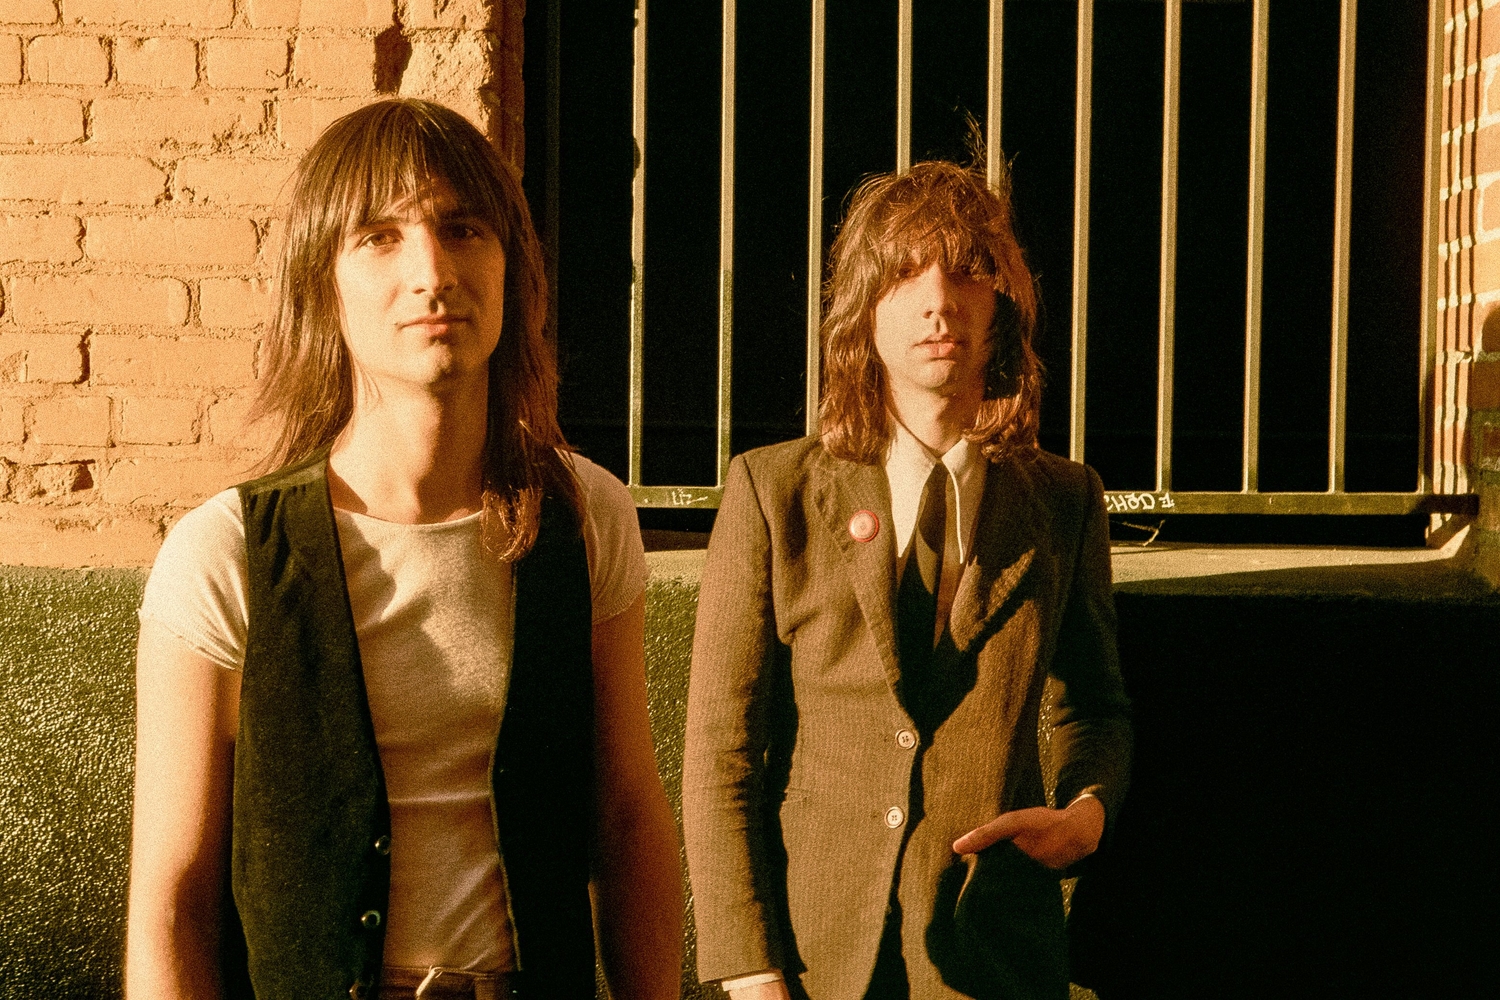 The Lemon Twigs announce new album ‘A Dream Is All We Know’ and share lead single ‘They Don’t Know How To Fall In Place’